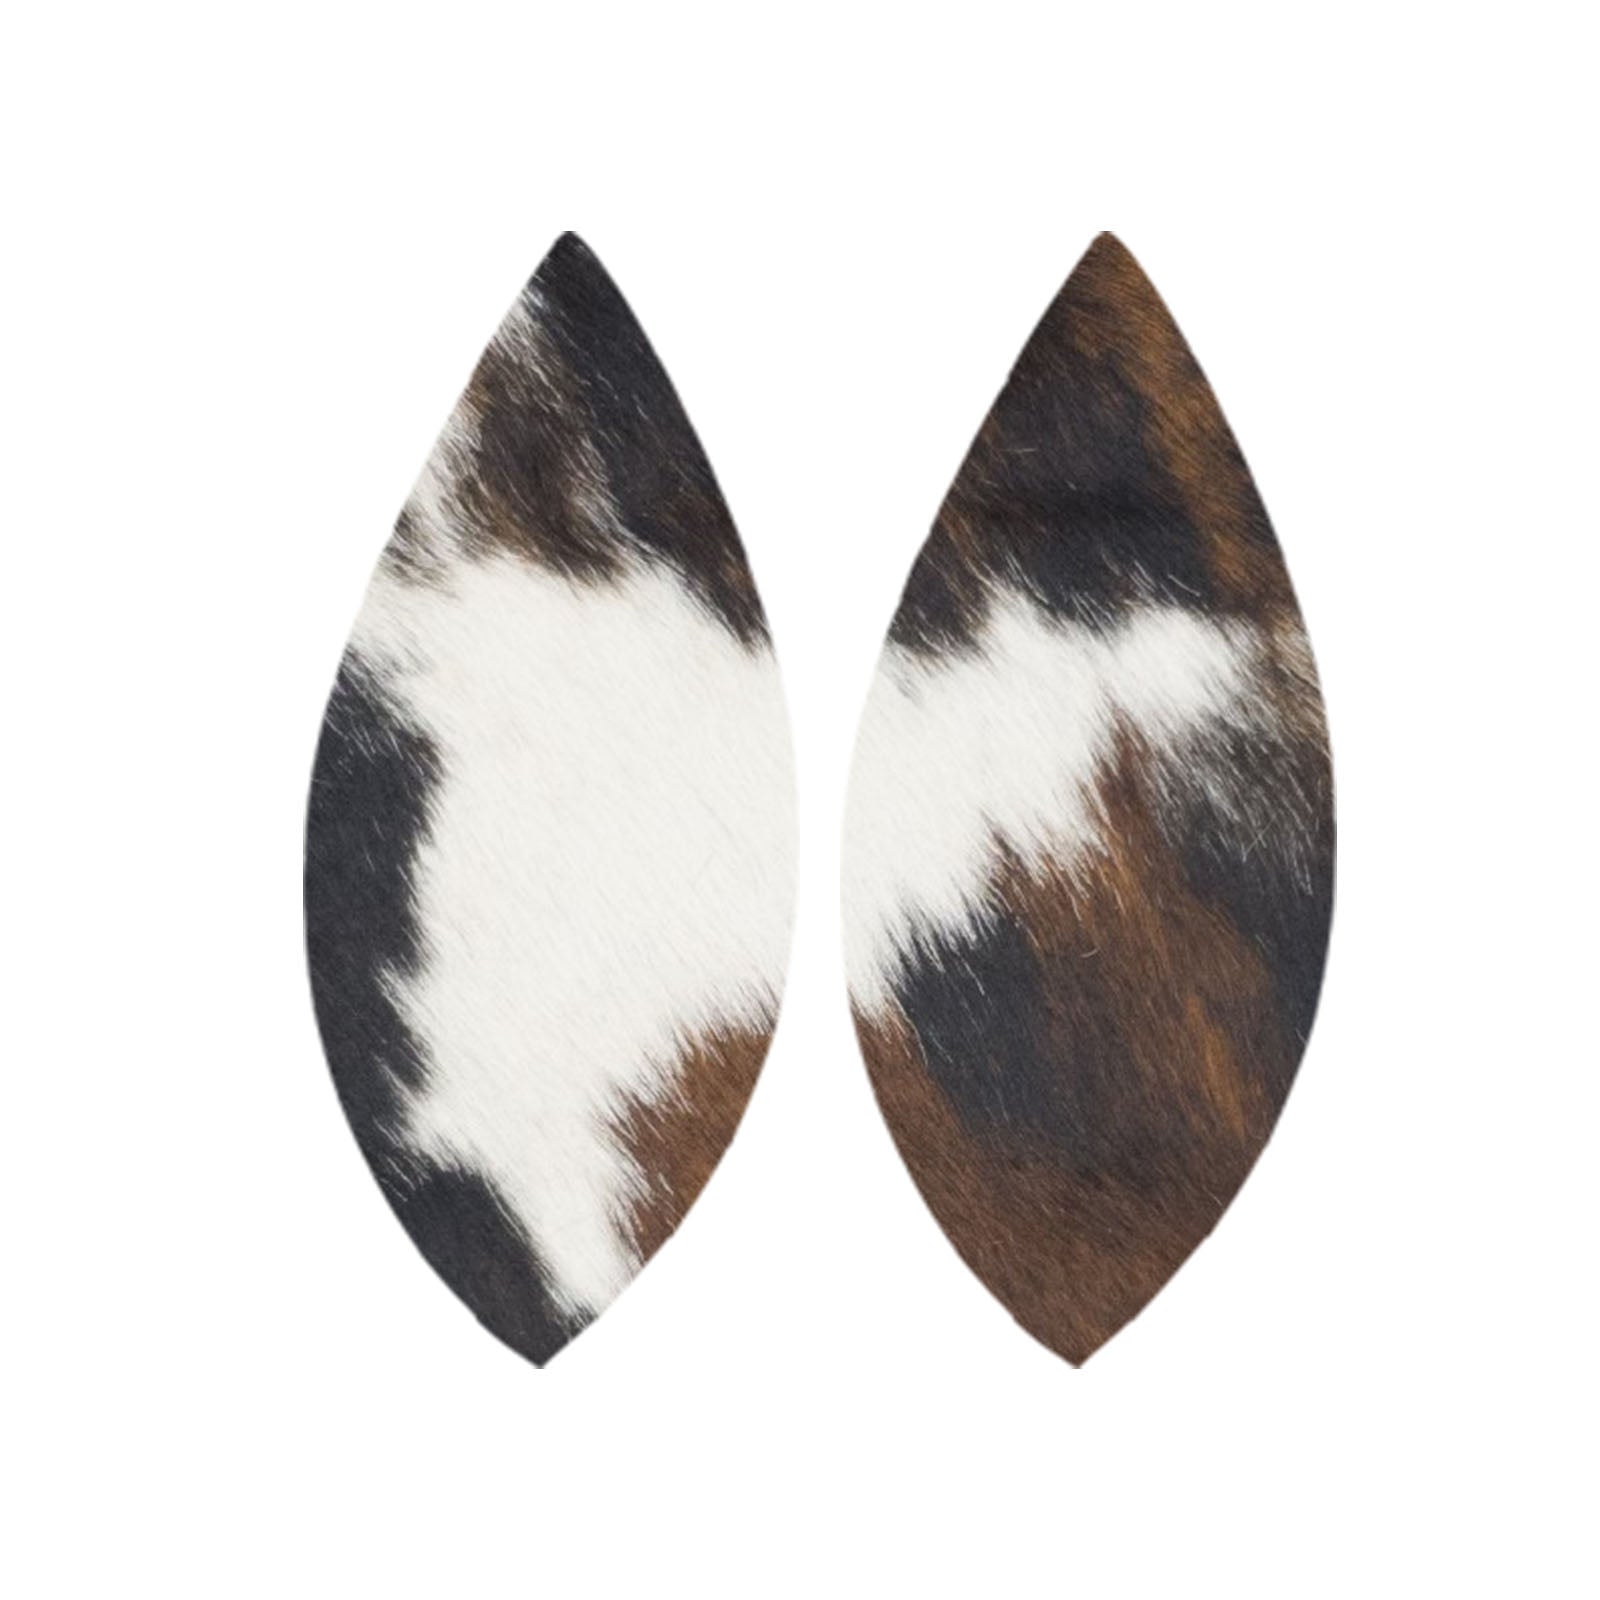 Tri-Colored Black/Brown/Off White Hair On Die Cut Earrings, Feather | The Leather Guy